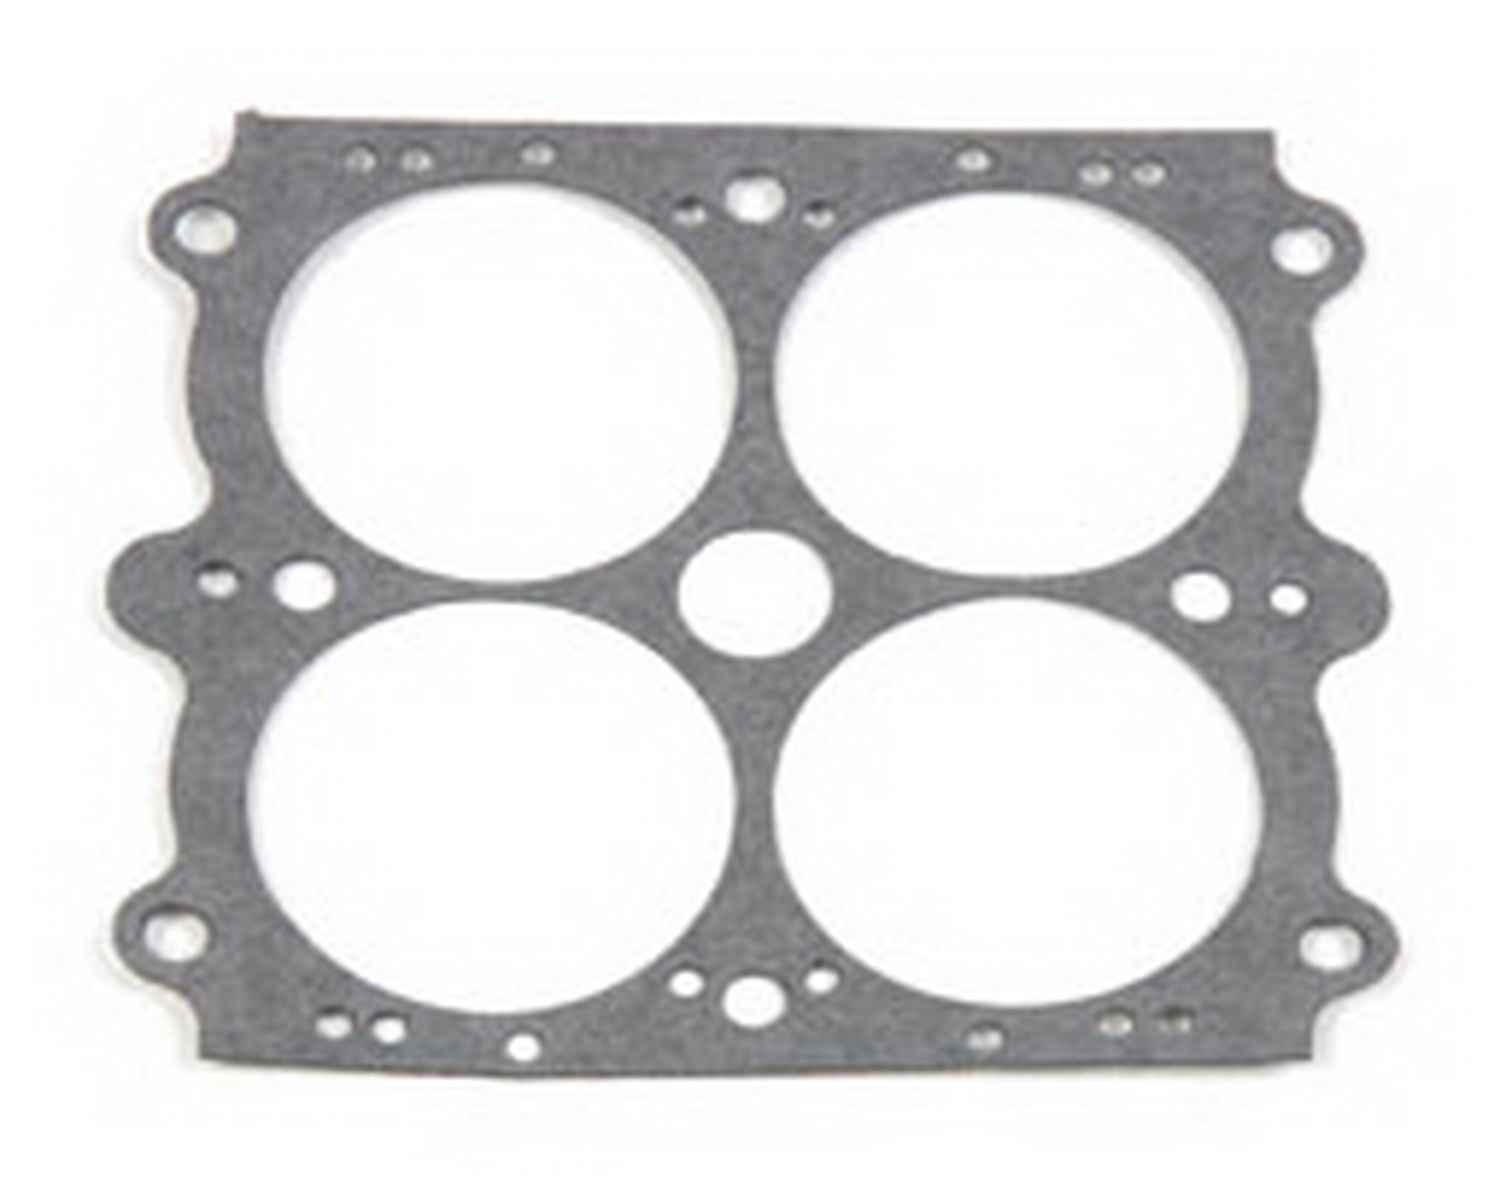 Holley Performance Holley Performance 108-7 Throttle Body Gasket